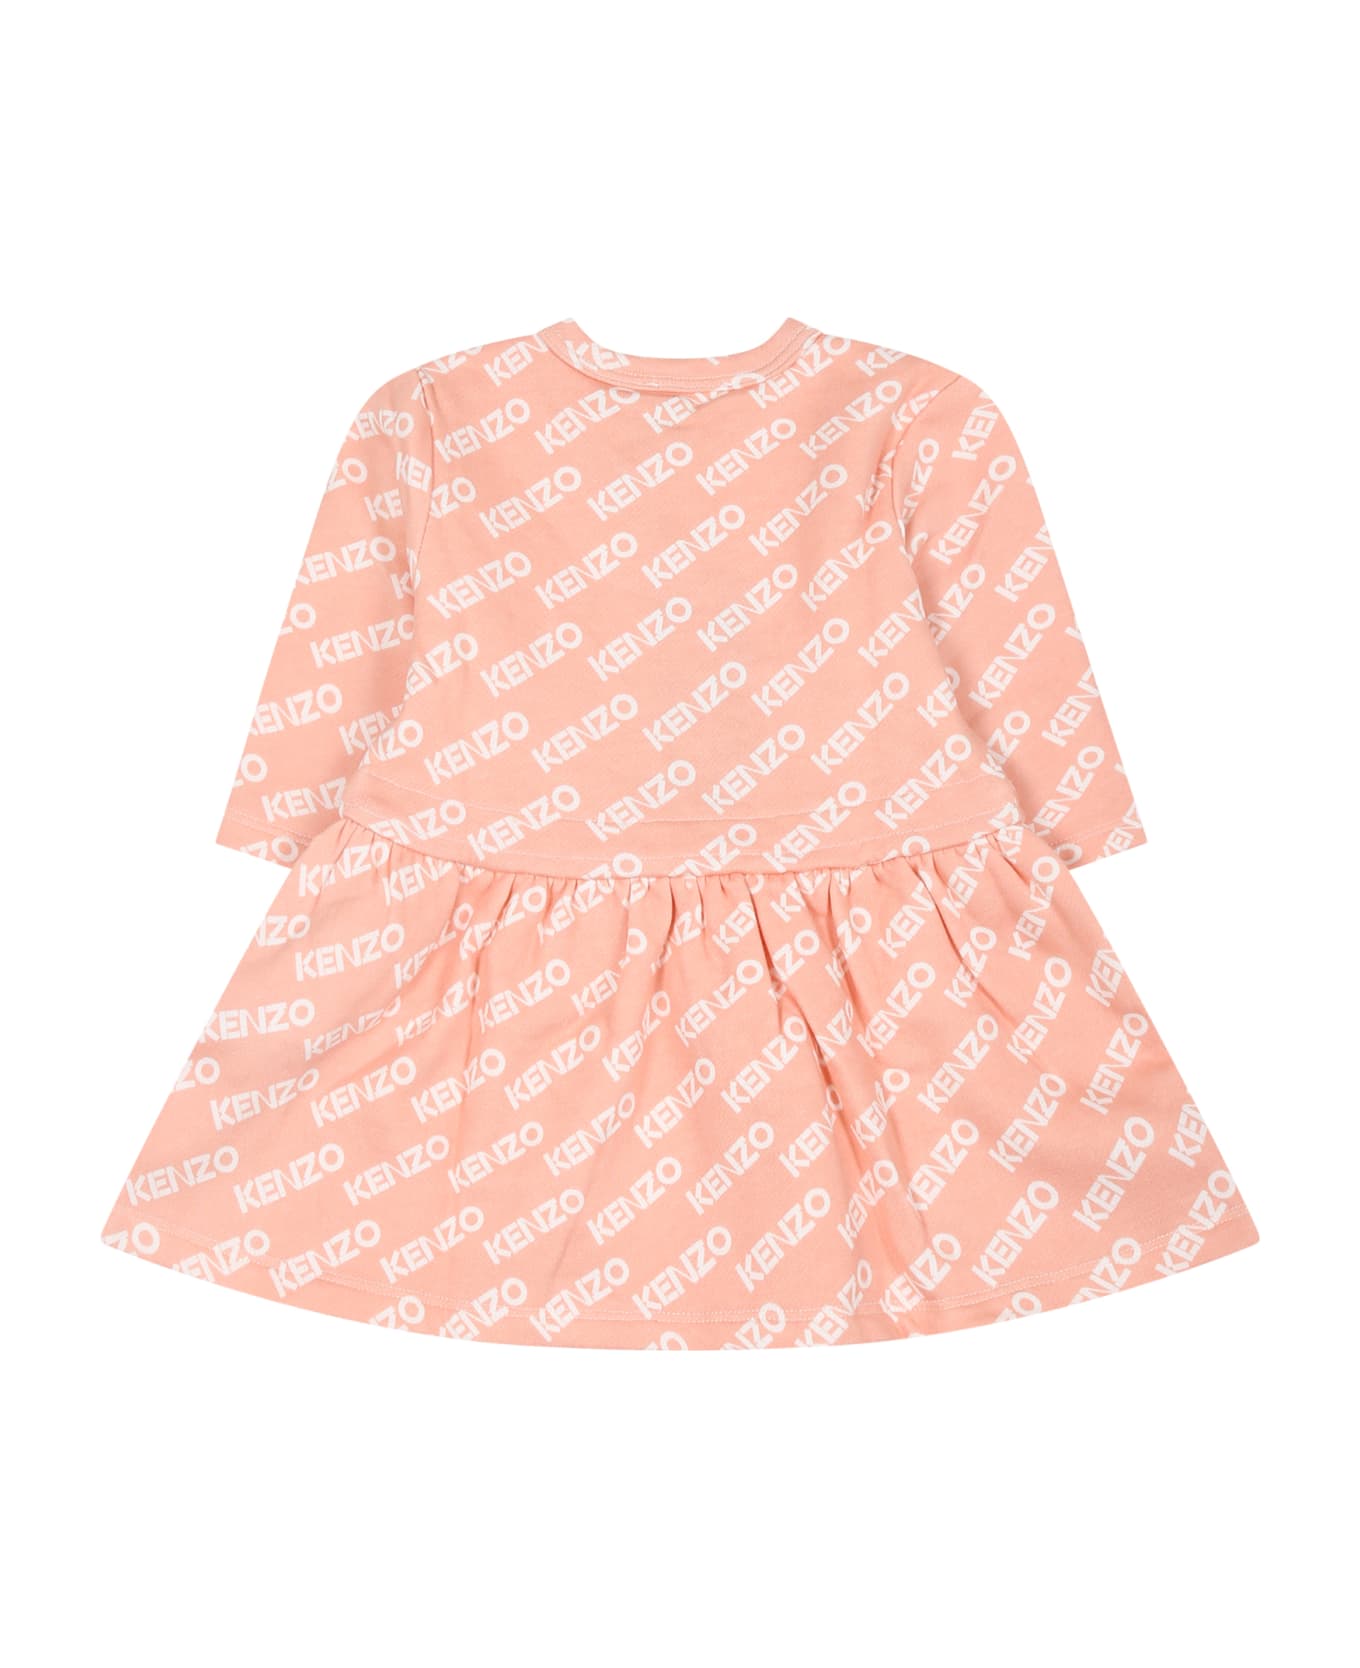 Kenzo Kids Pink Dress For Baby Girl With Logo - Pink ウェア